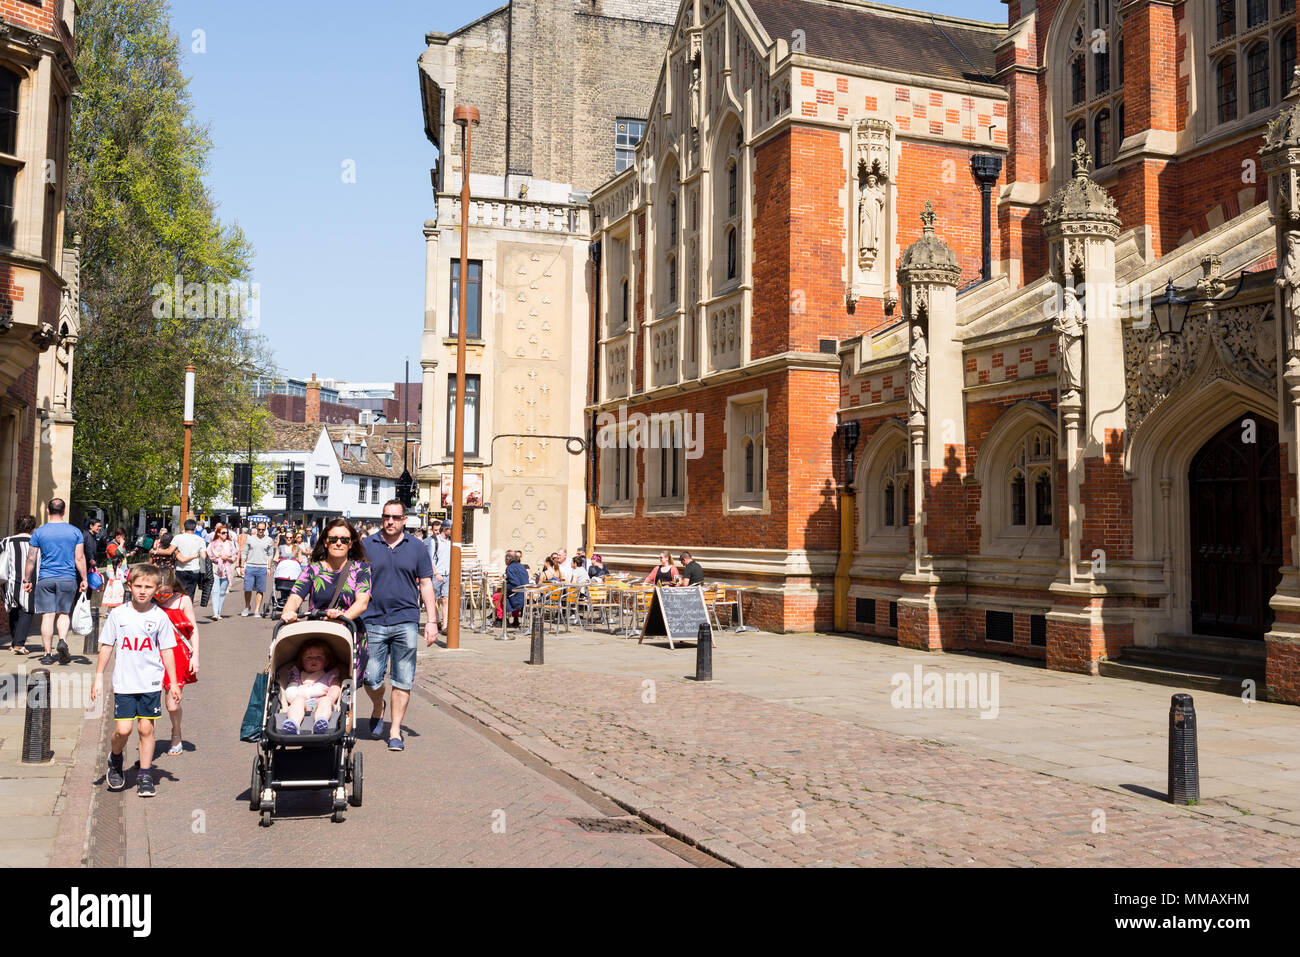 Cambridge, UK -April 2018. People and families walking next to Old Divinity School in St Johns street, central Cambridge city centre Stock Photo